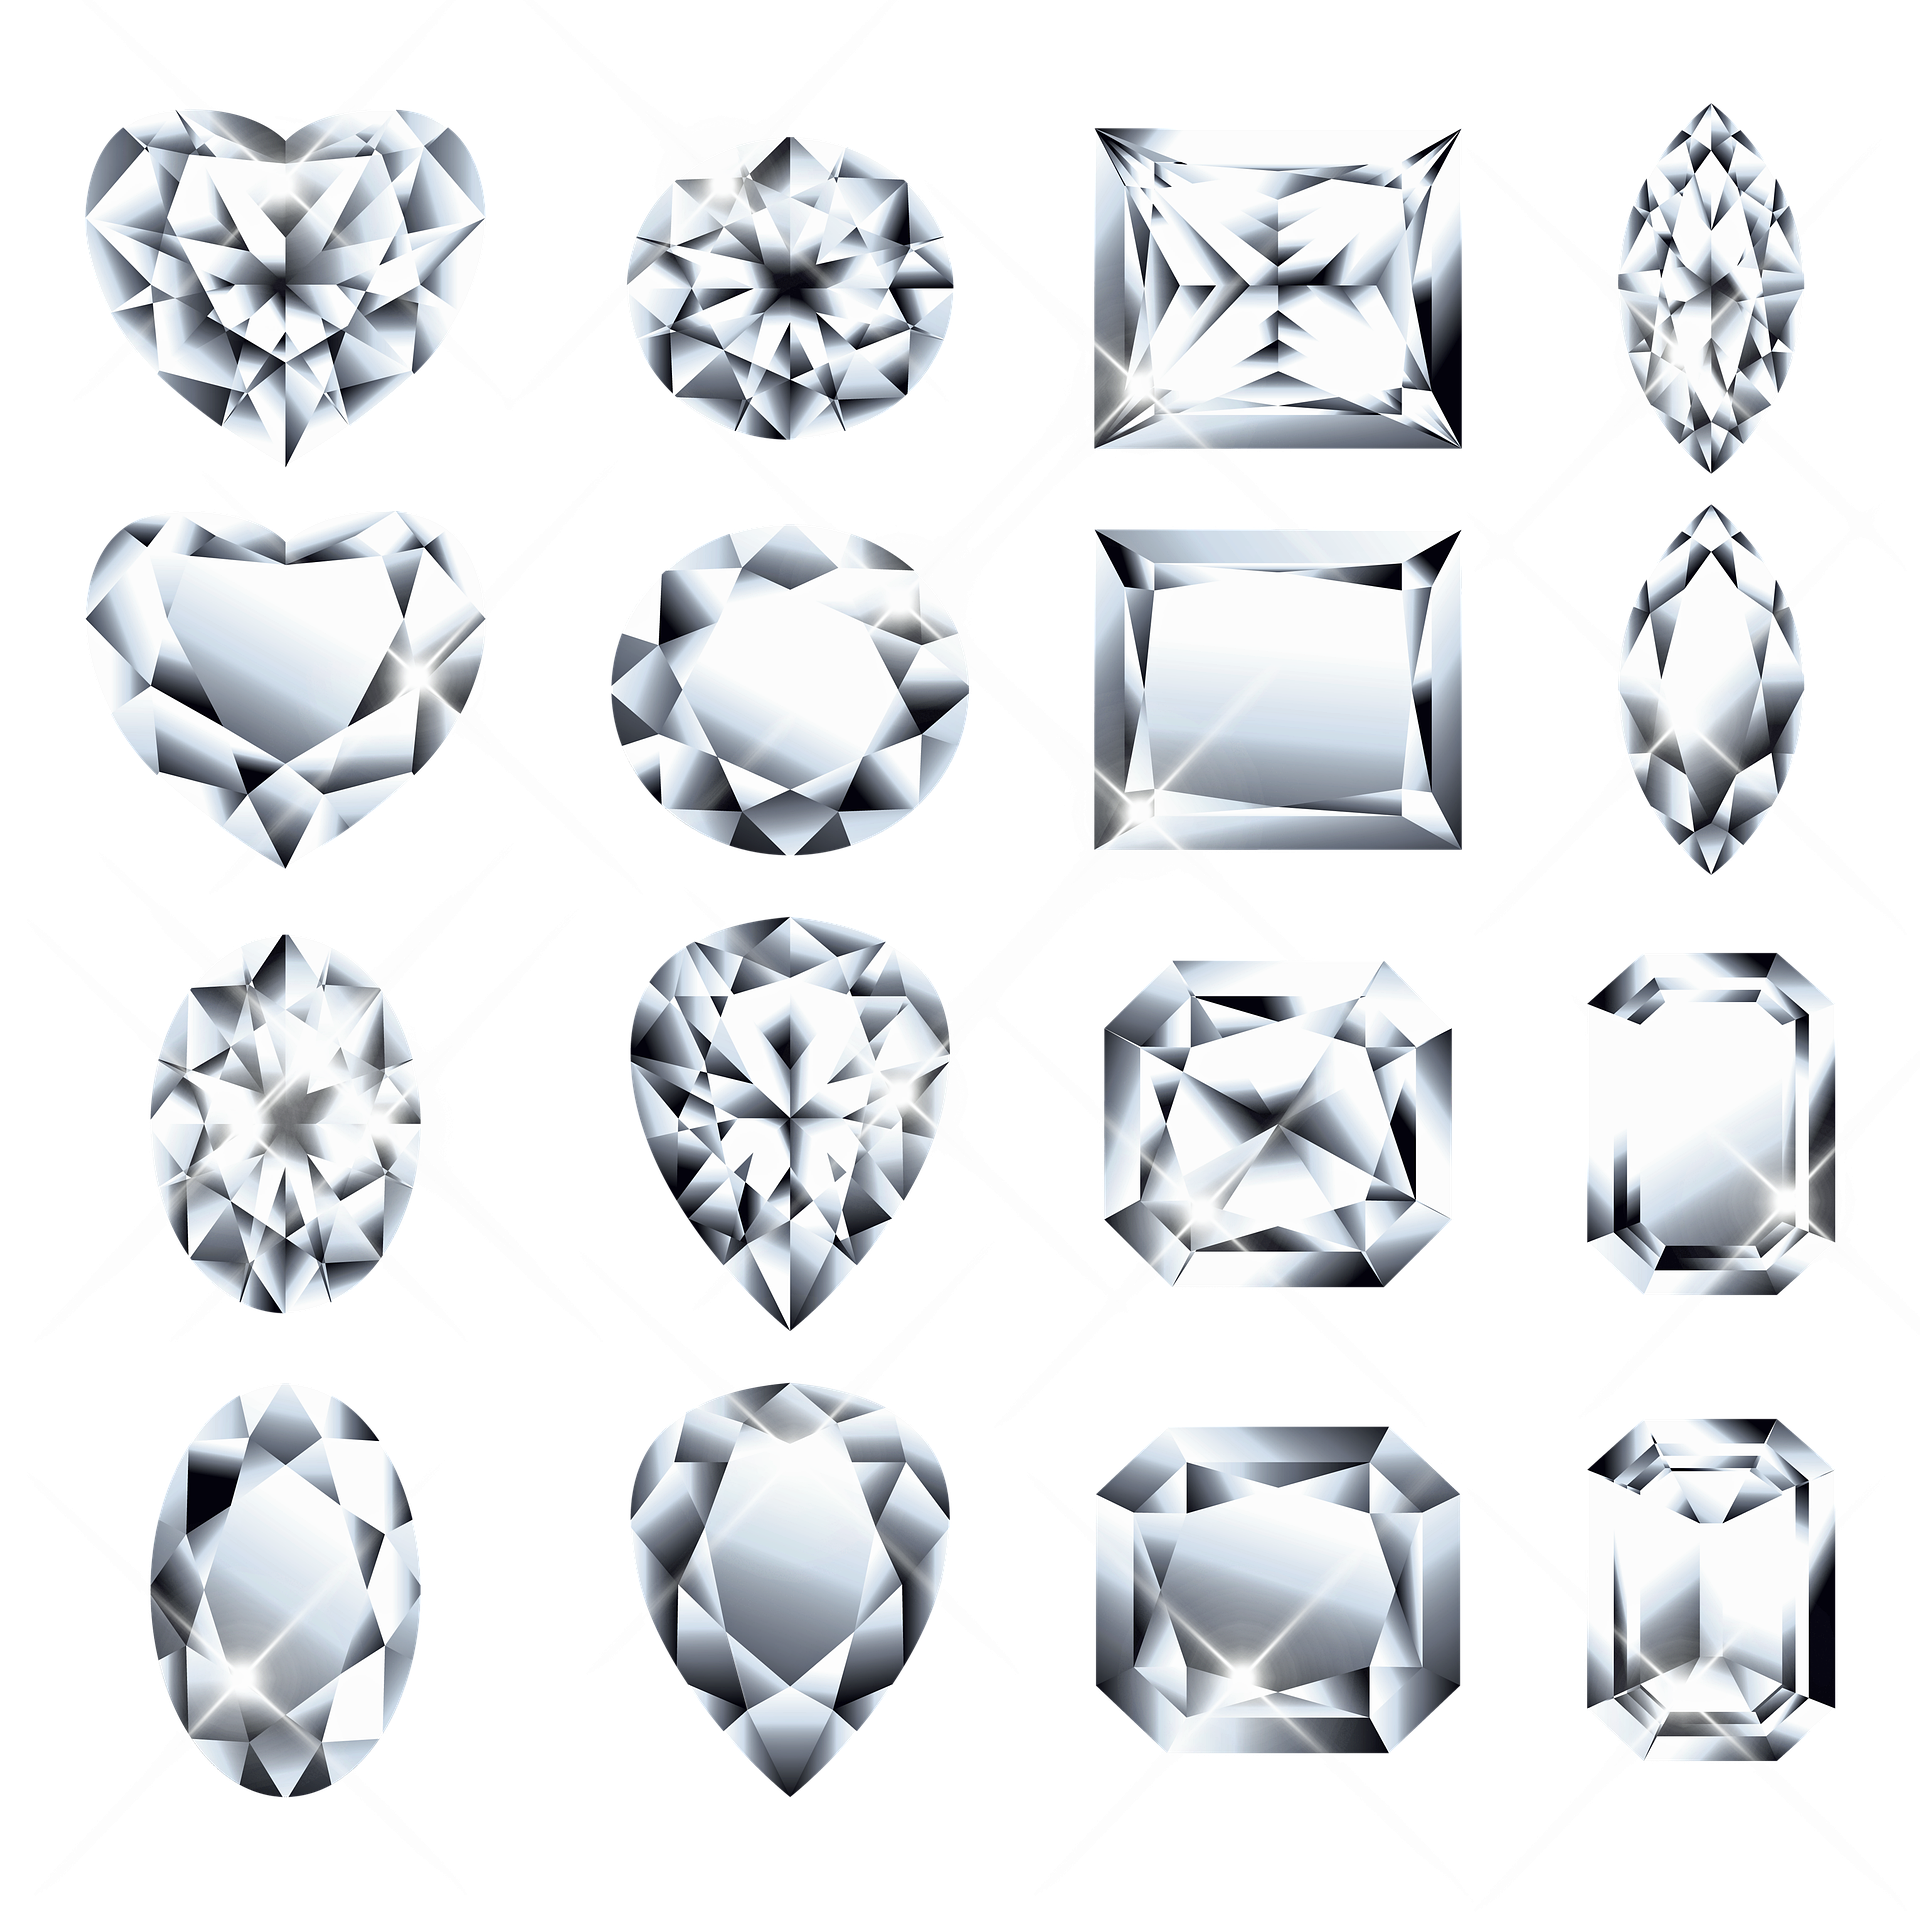 Image showing various diamond cuts and shapes